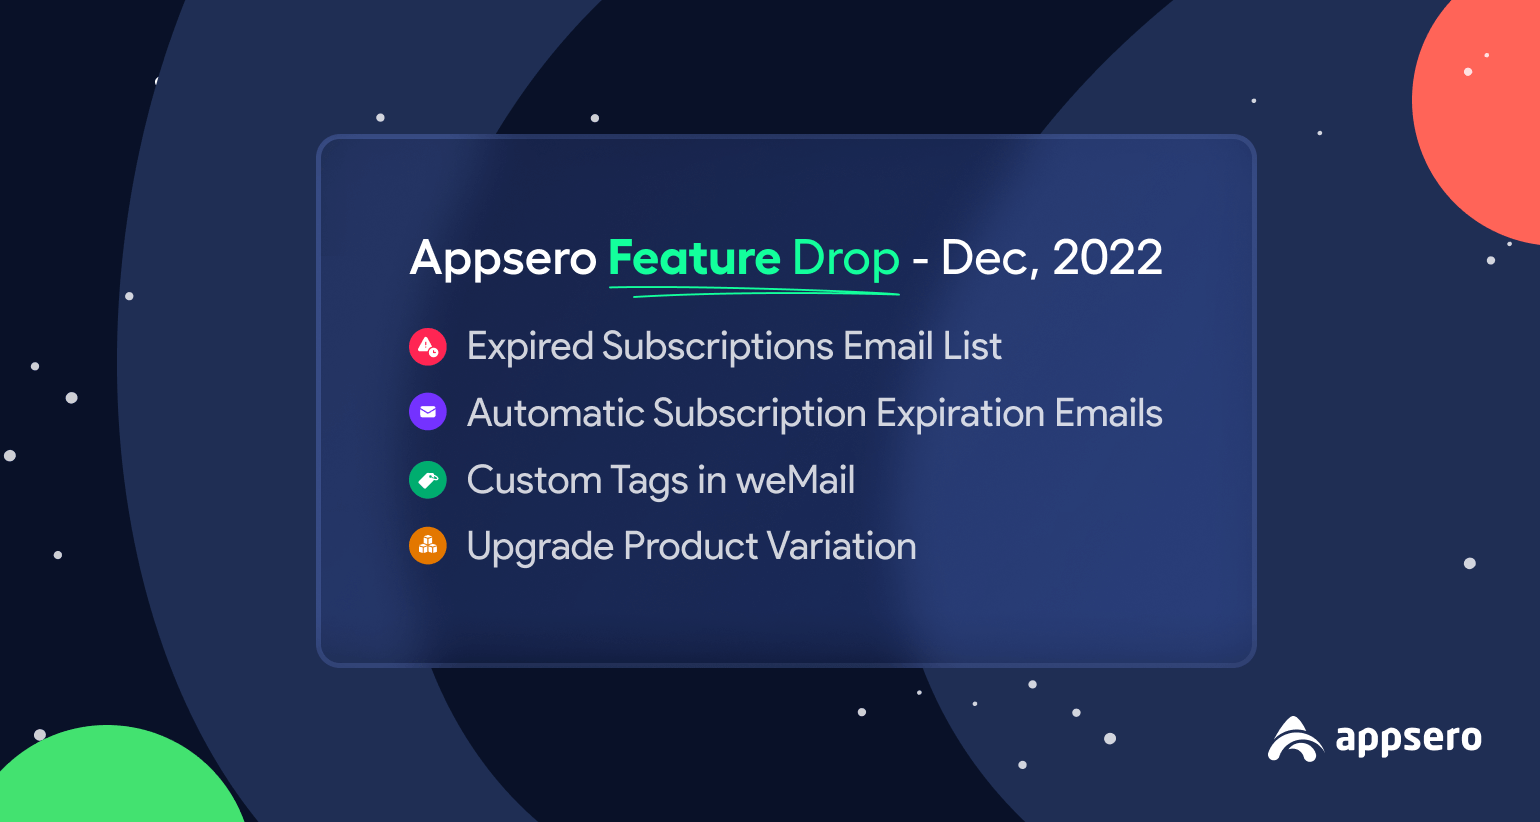 Feature Release 🎉: Automatic subscription expiration emails, custom tags in weMail, product variation upgrades, and more 5